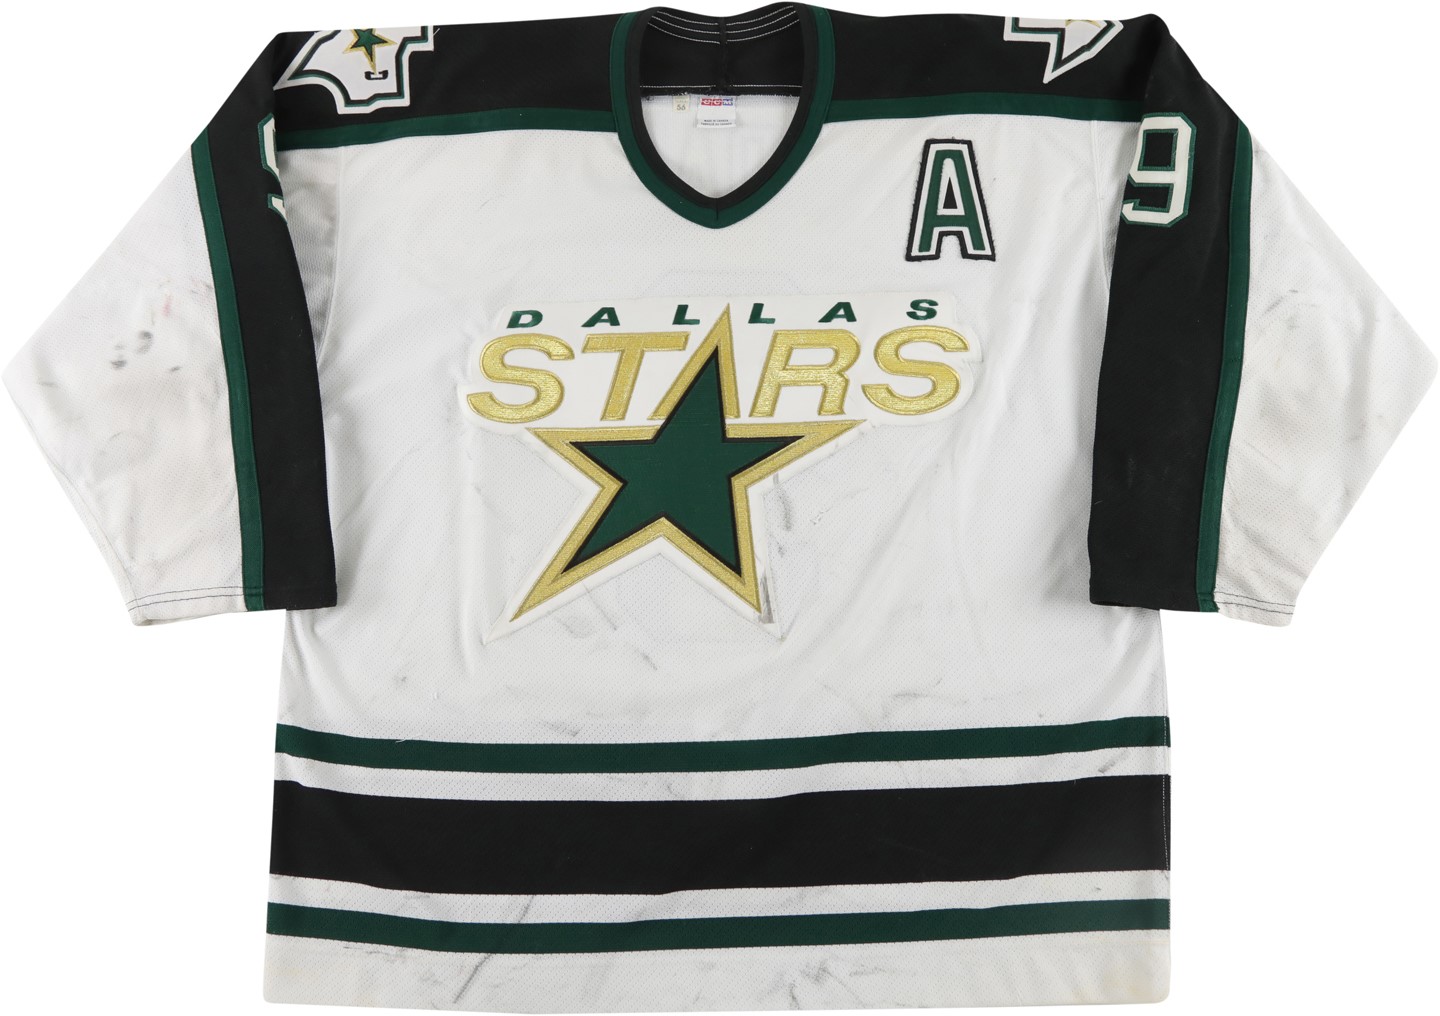 Hockey - 1998-99 Mike Modano Dallas Stars "Stanley Cup Collection" Game Worn Jersey (Photo-Matched, MeiGray & Team LOA)